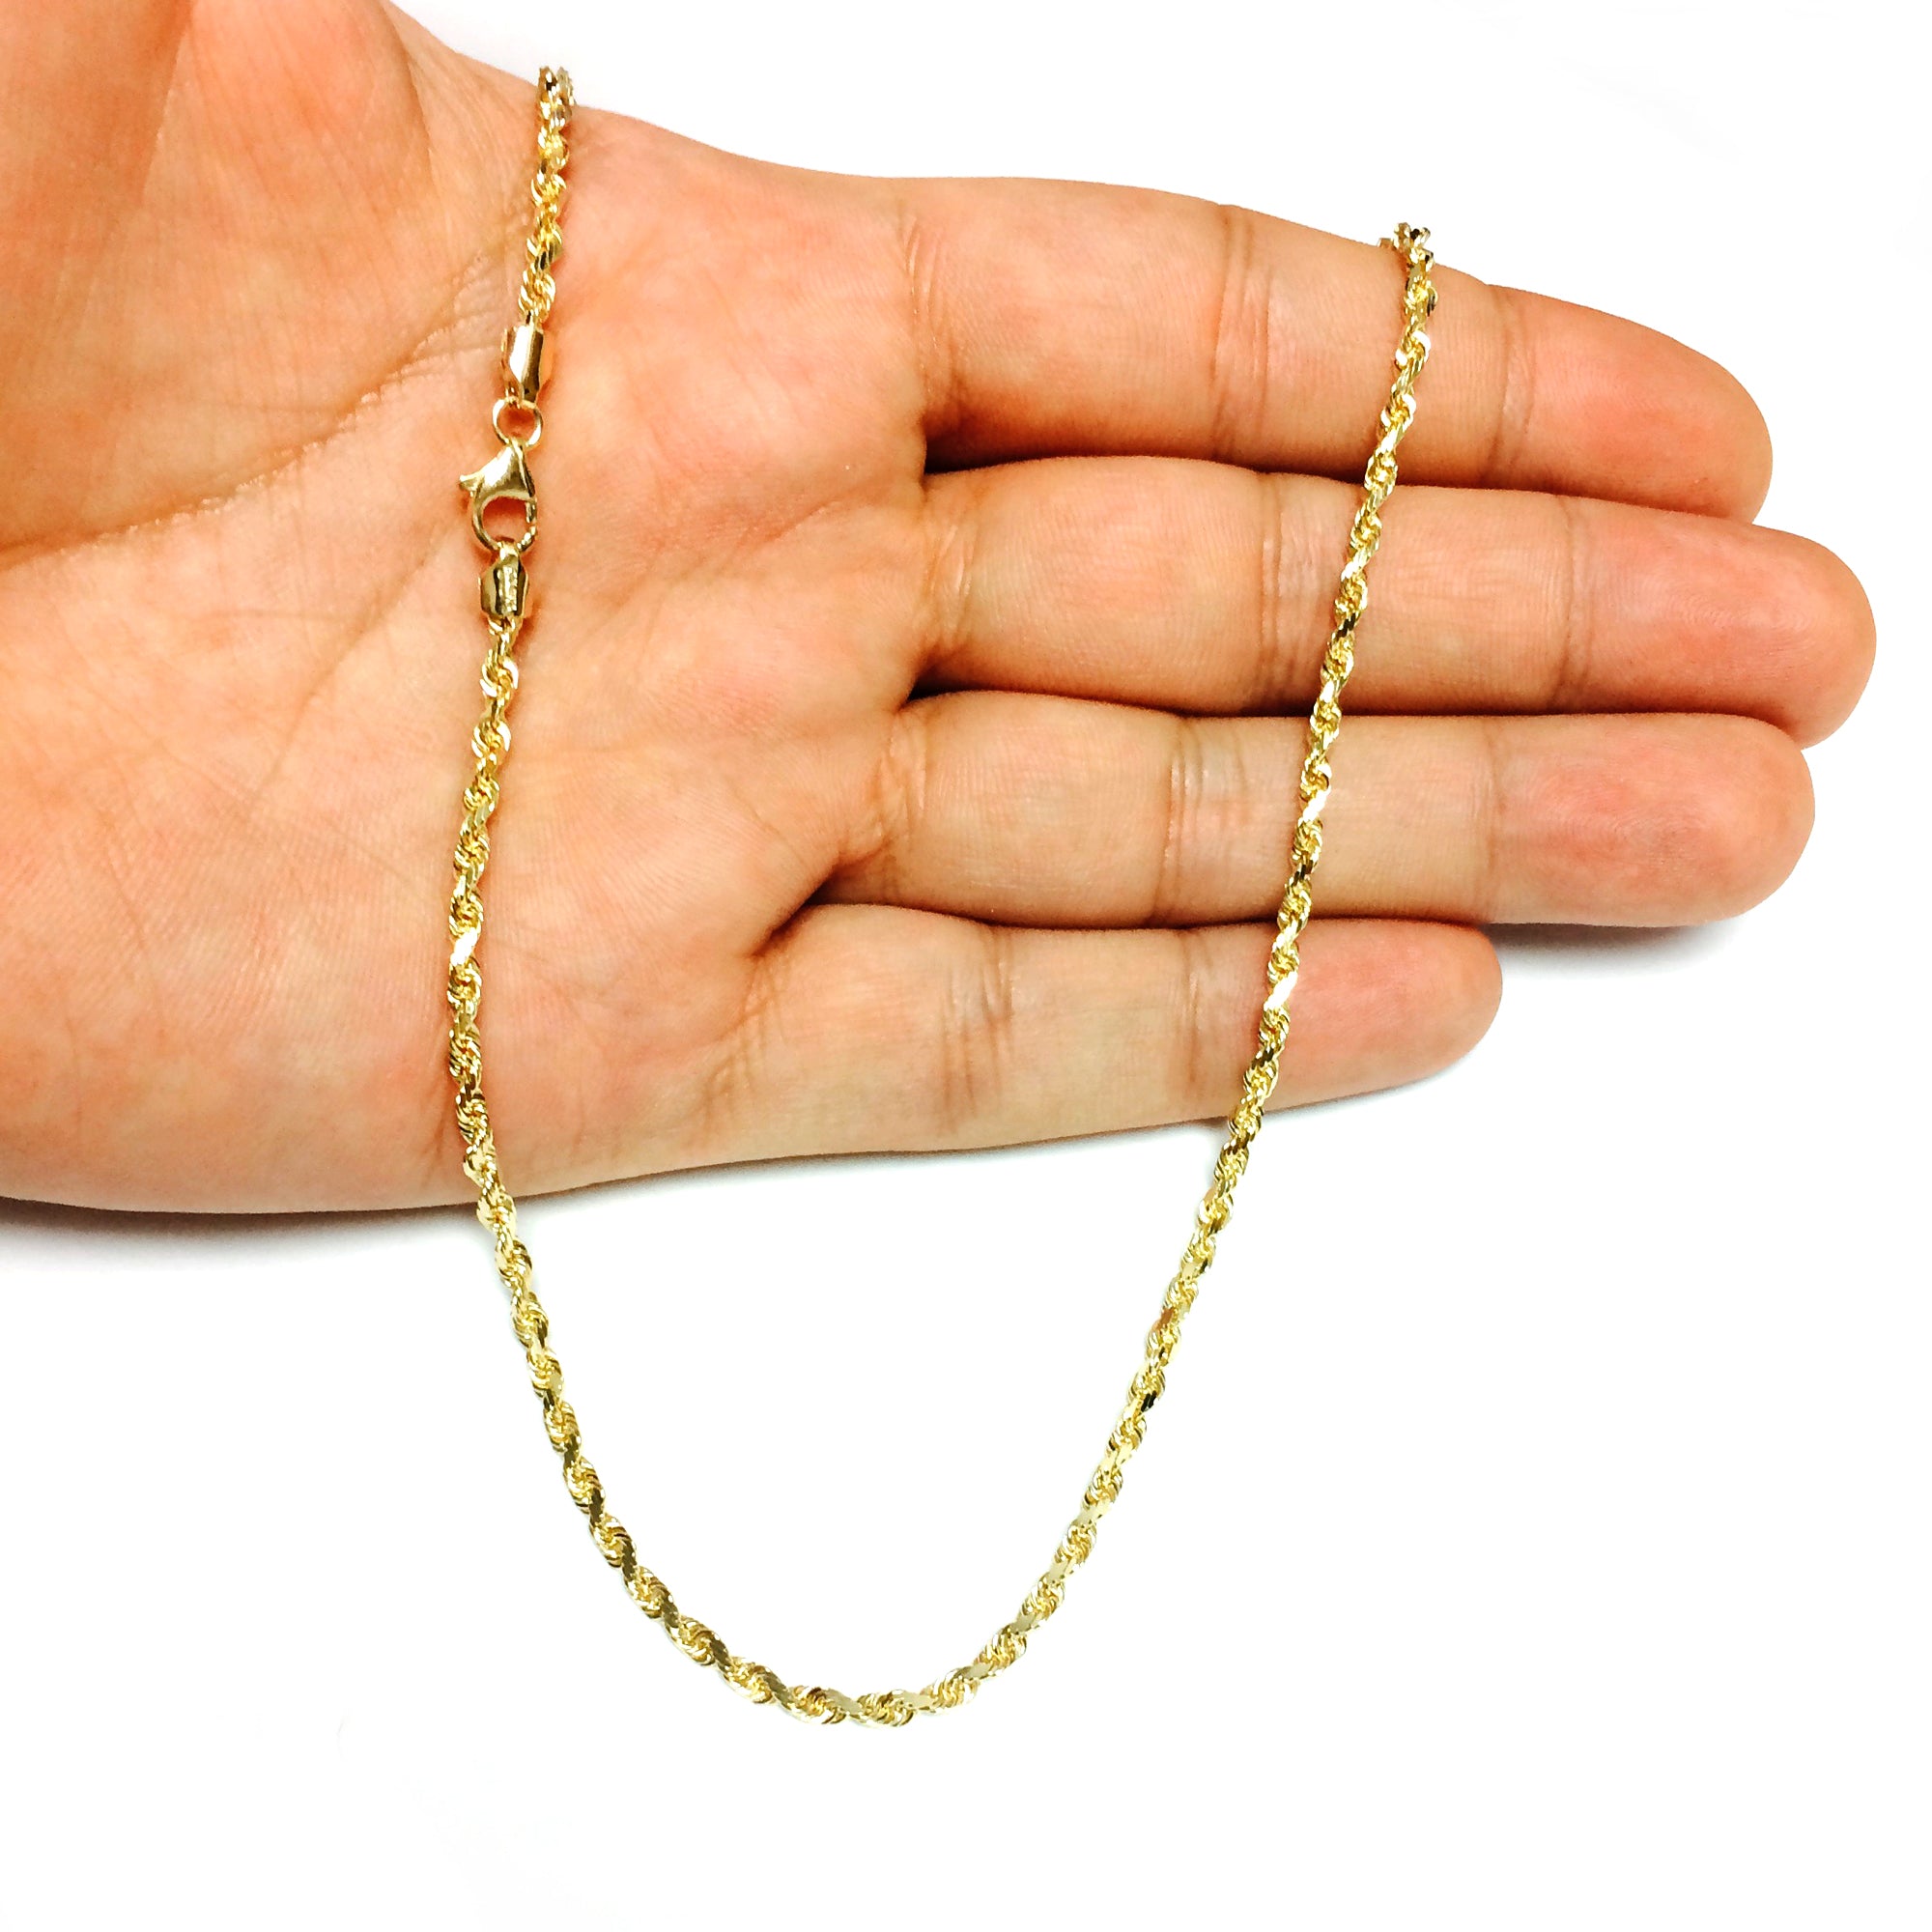 Buy 10K Gold 2MM 3MM 4MM Diamond Cut Rope Chain Necklace for Men and Women-  Braided Twist Chain Necklace, 10K Gold Necklace, 10 Karat Gold Chain, Sizes  16-45 at Amazon.in